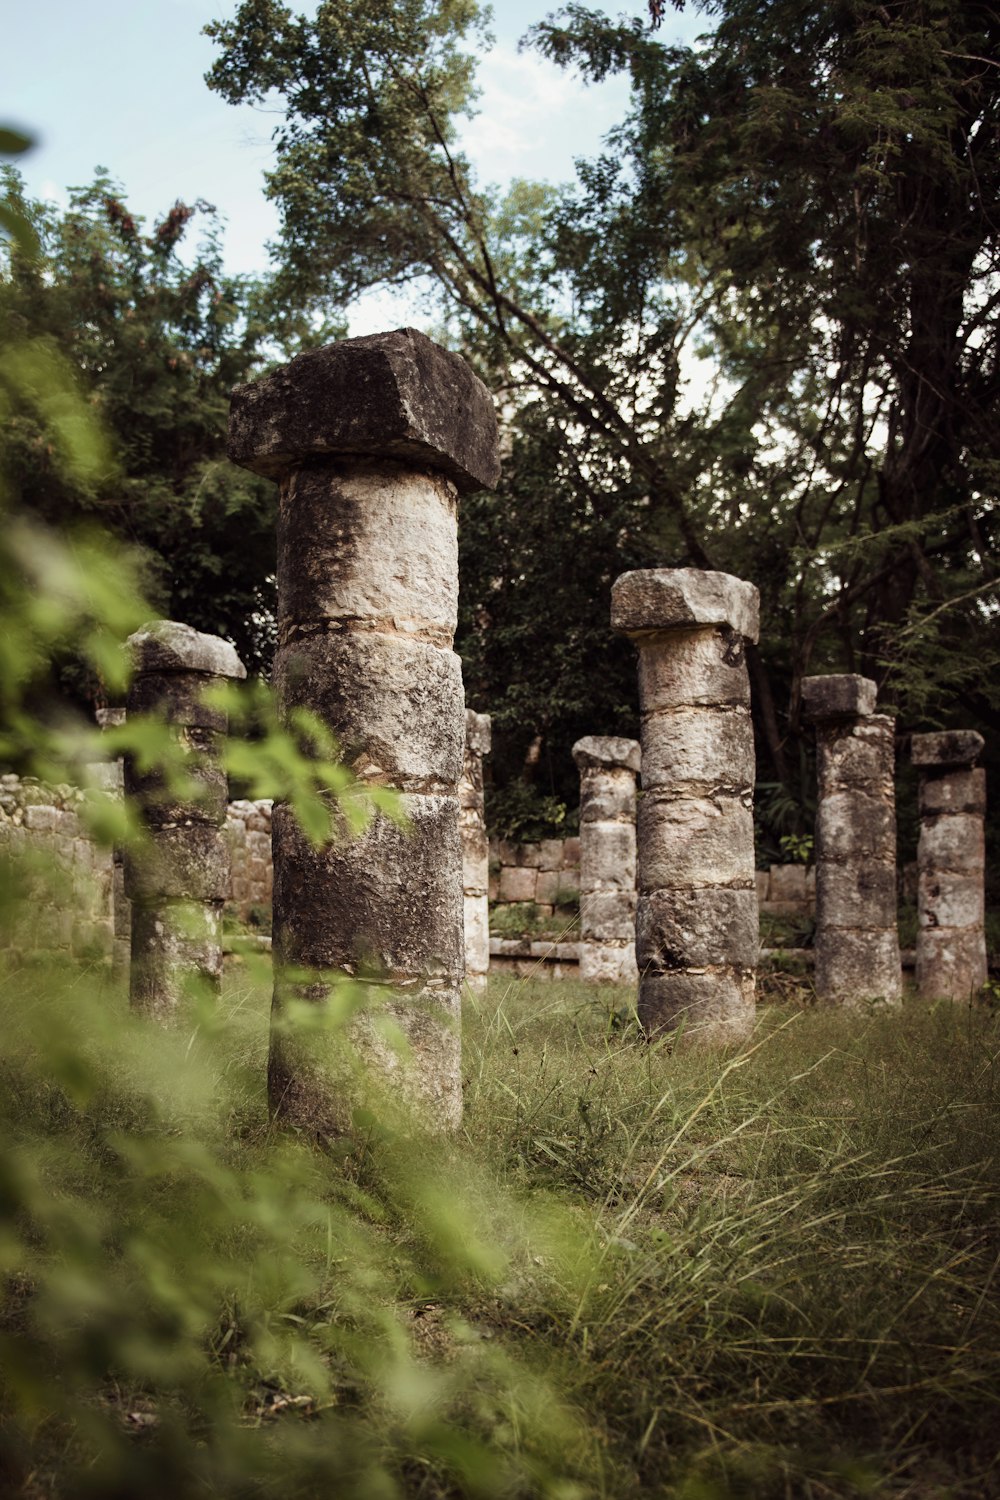 a group of stone pillars in a grassy area